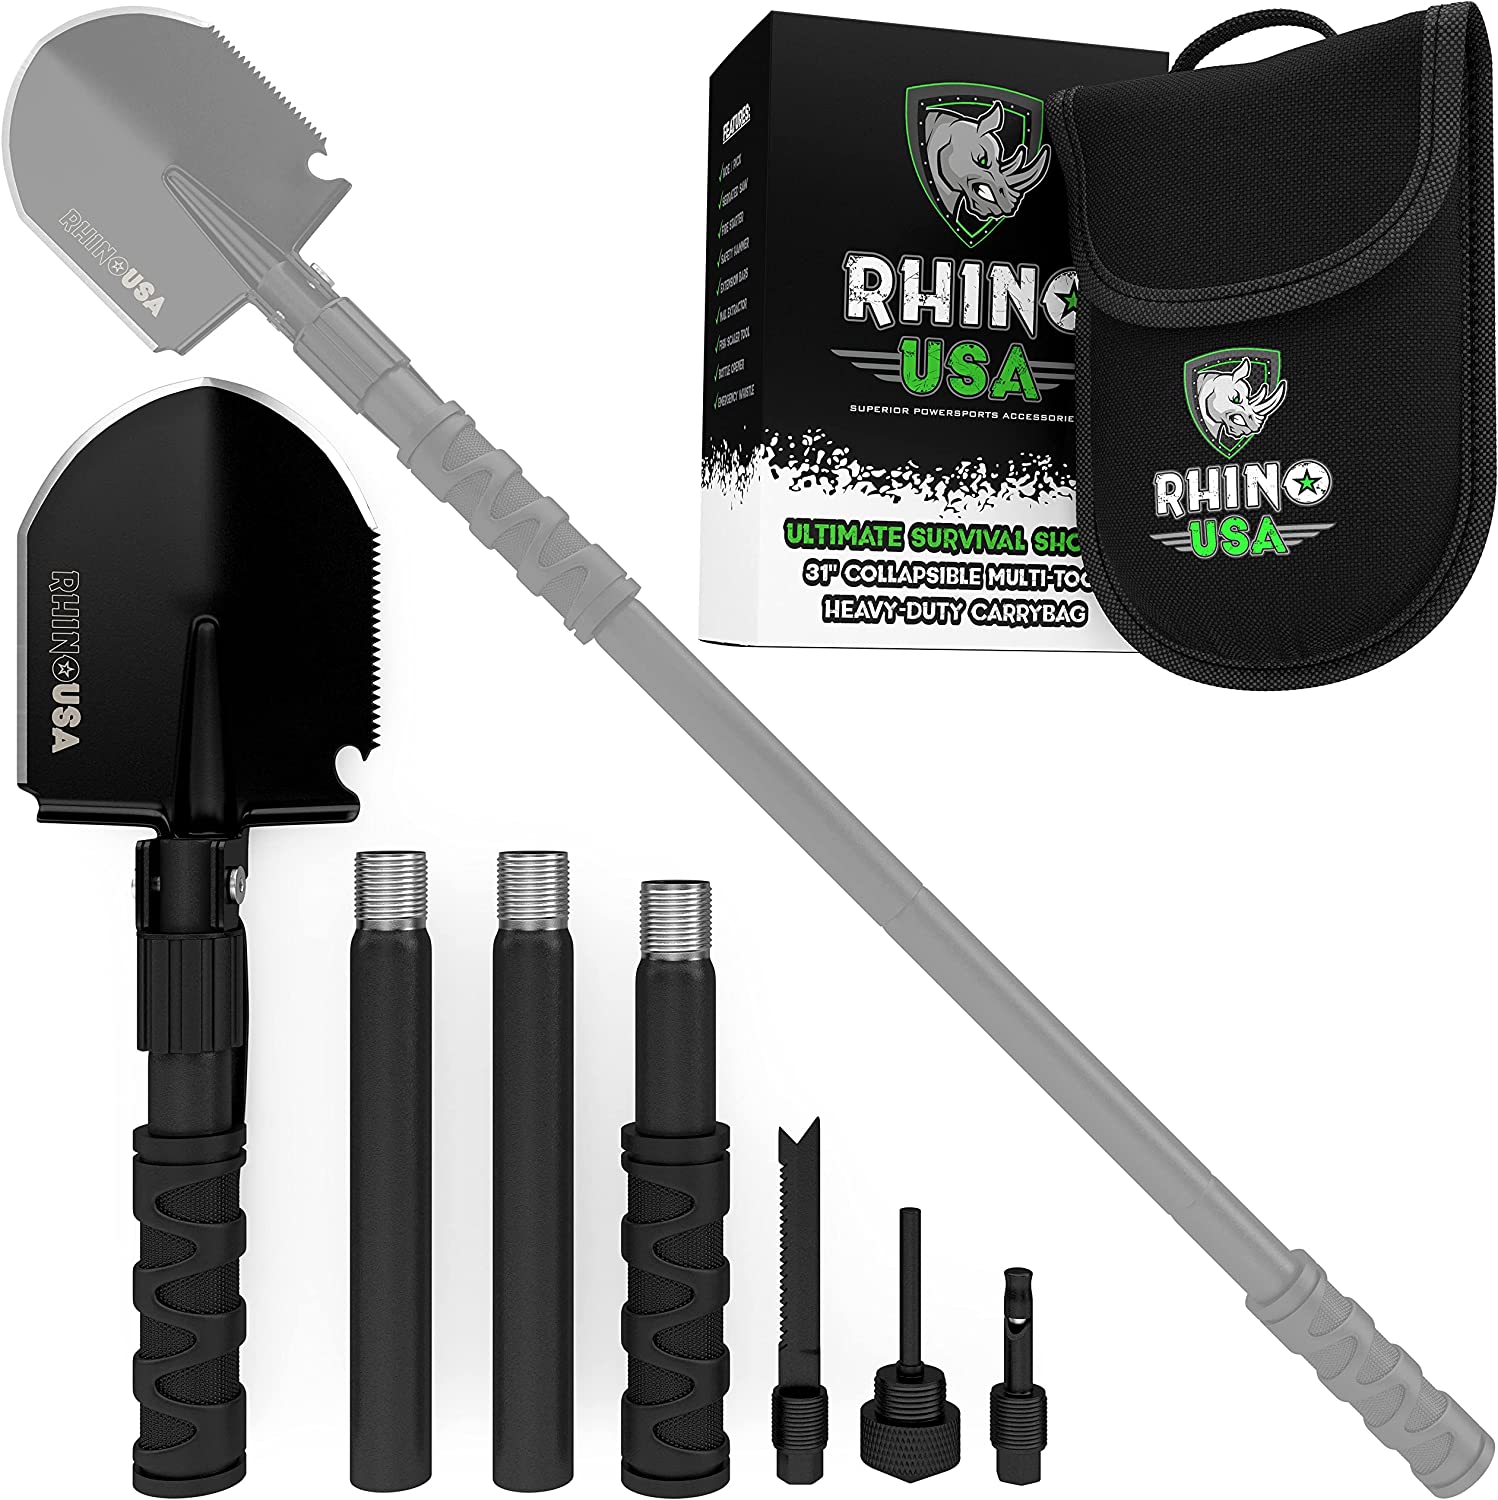 Rhino USA Survival Shovel w/Pick – Heavy Duty Carbon Steel Military Style Entrenching Tool for Off Road, Camping, Gardening, Beach, Digging Dirt, Sand, Mud & Snow. (Survival Shovel)